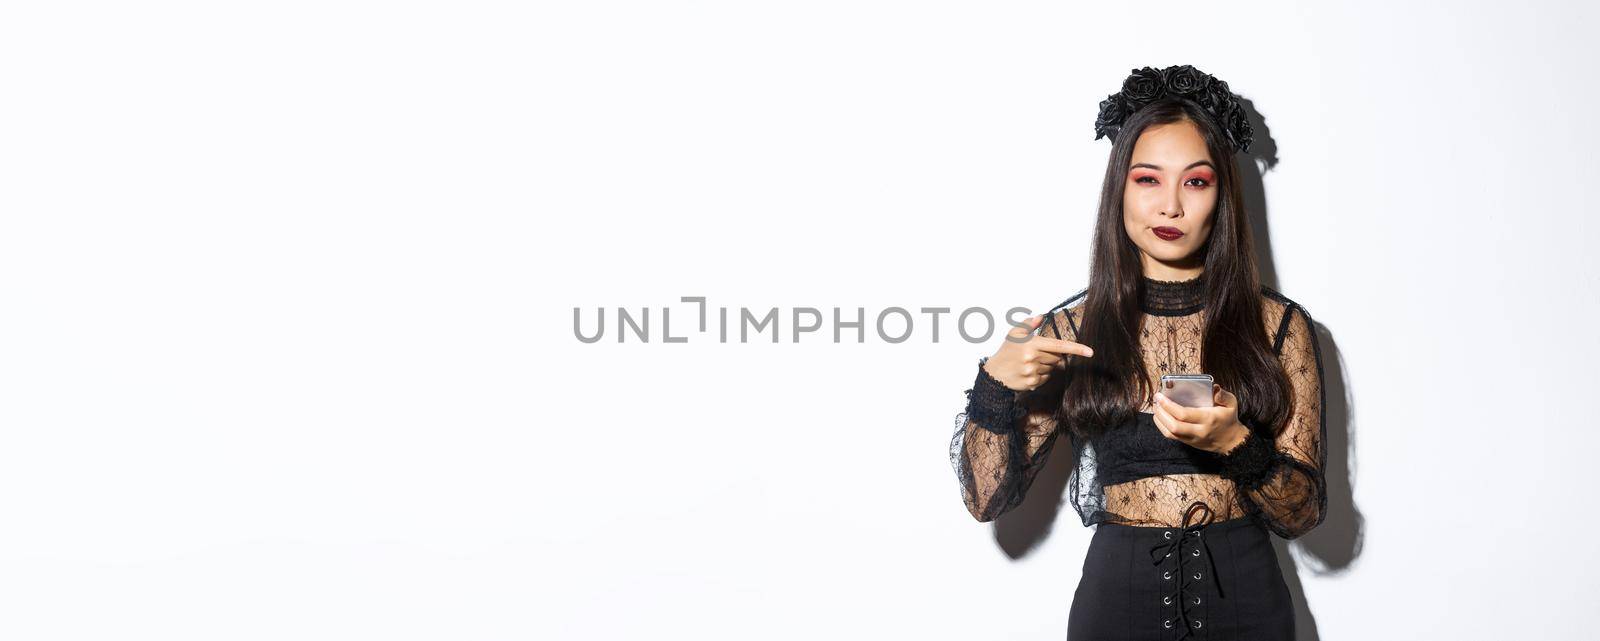 Sassy beautiful asian woman in gothic dress and black wreath pointing finger at mobile phone, showing something about halloween.